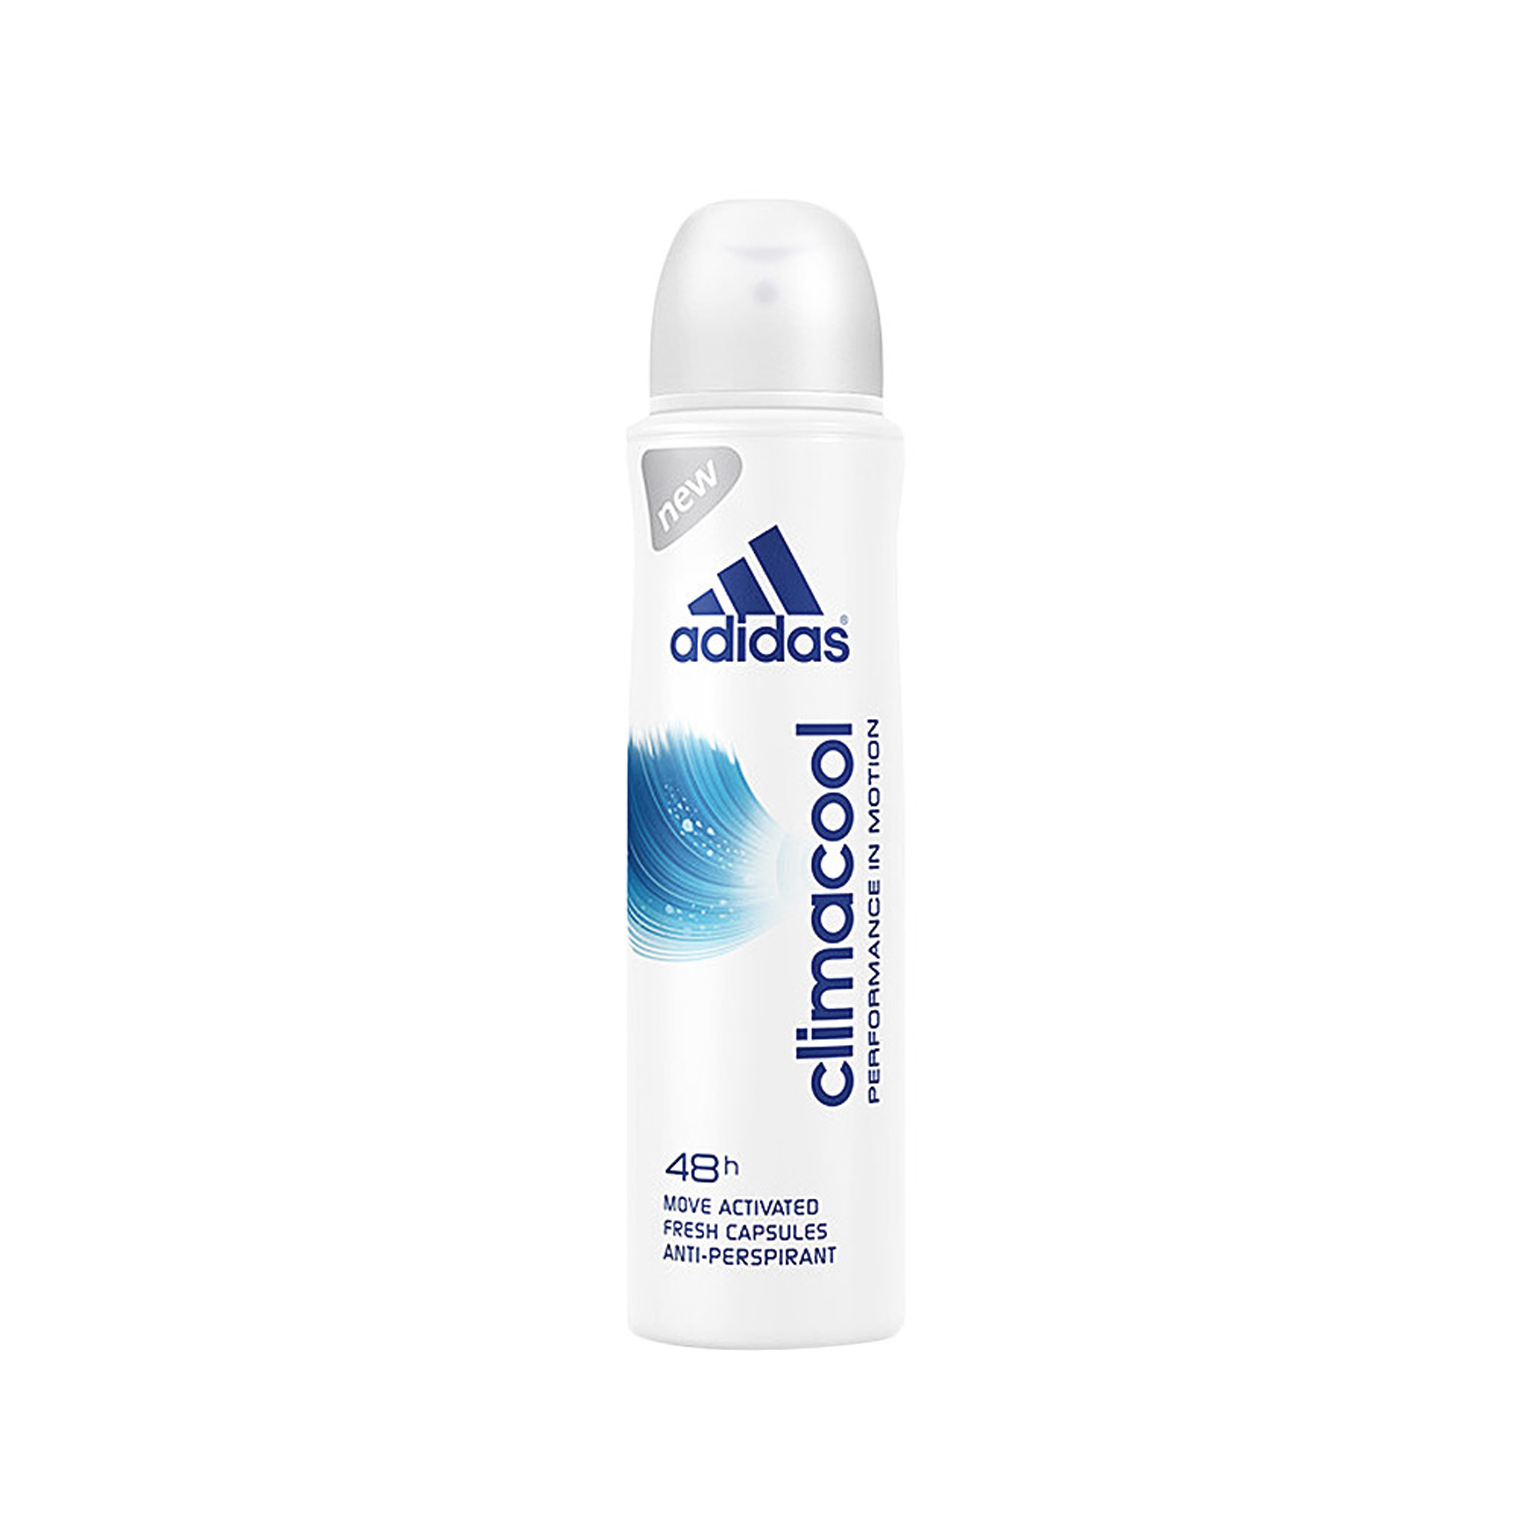 Adidas Climacool Performance In Motion 150ml | Shopifull